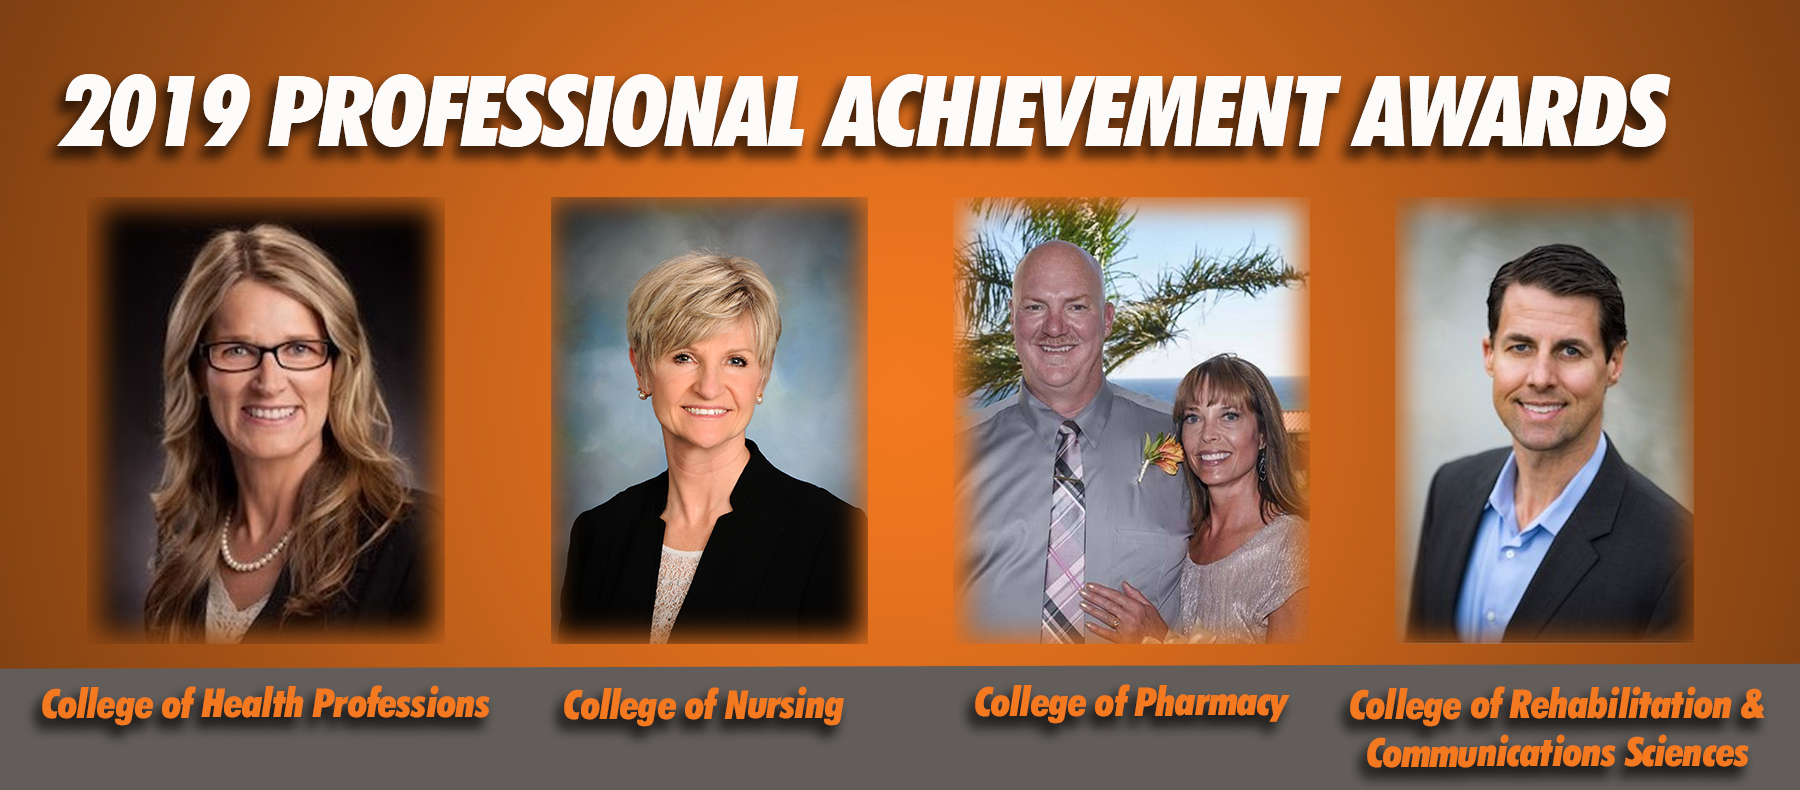 Orange background with 4 photos of Professional Achievement Award winners and white text